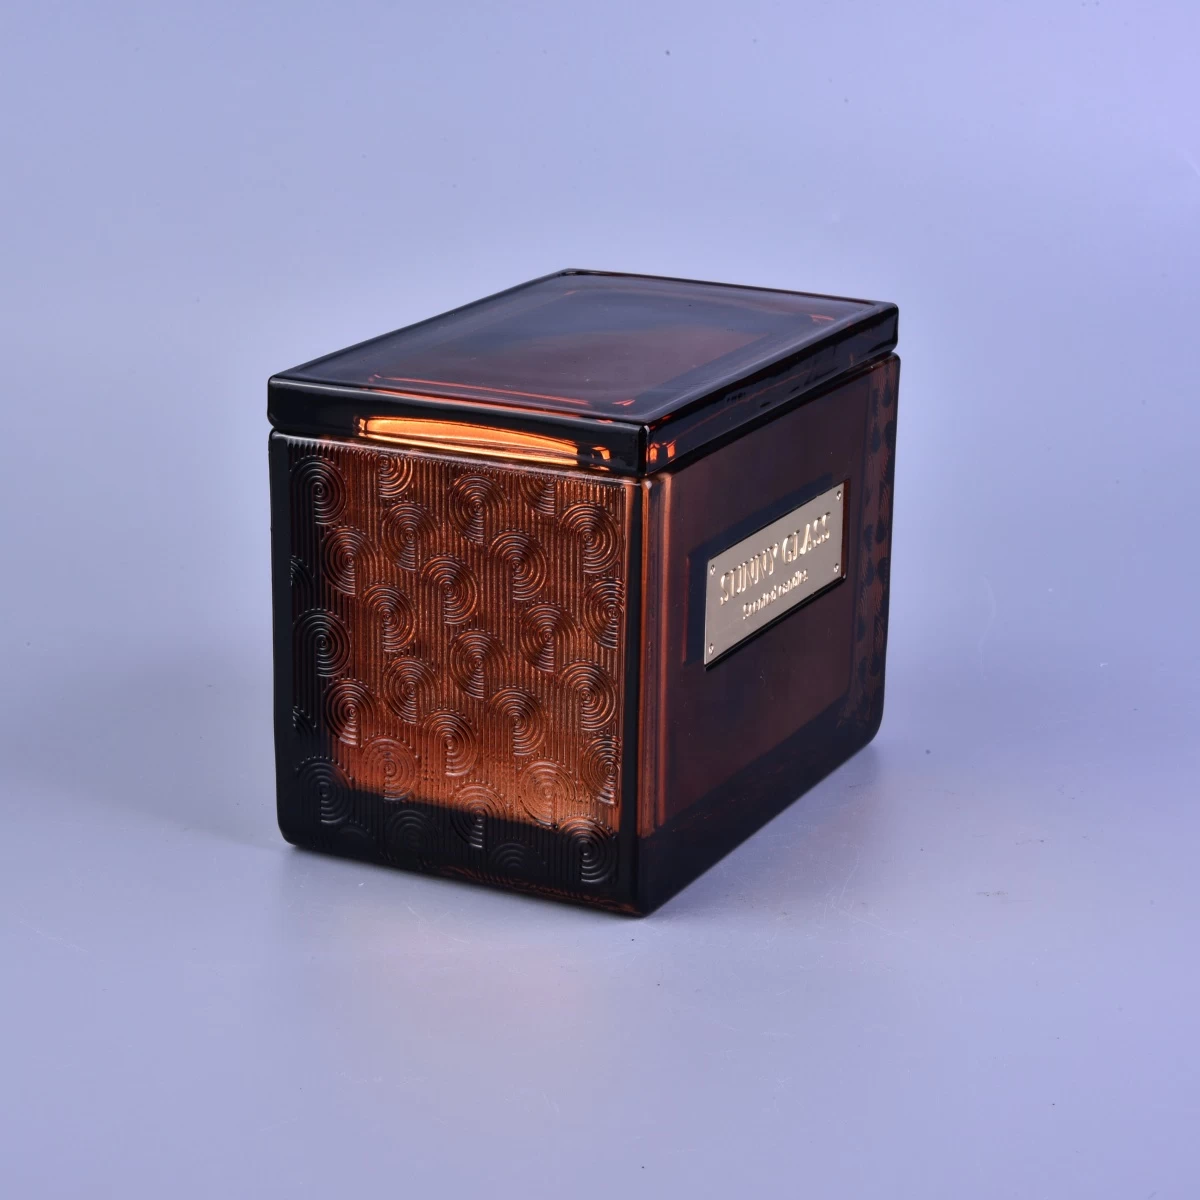 10oz Sunny luxury amber square scented glass candle holders with lids